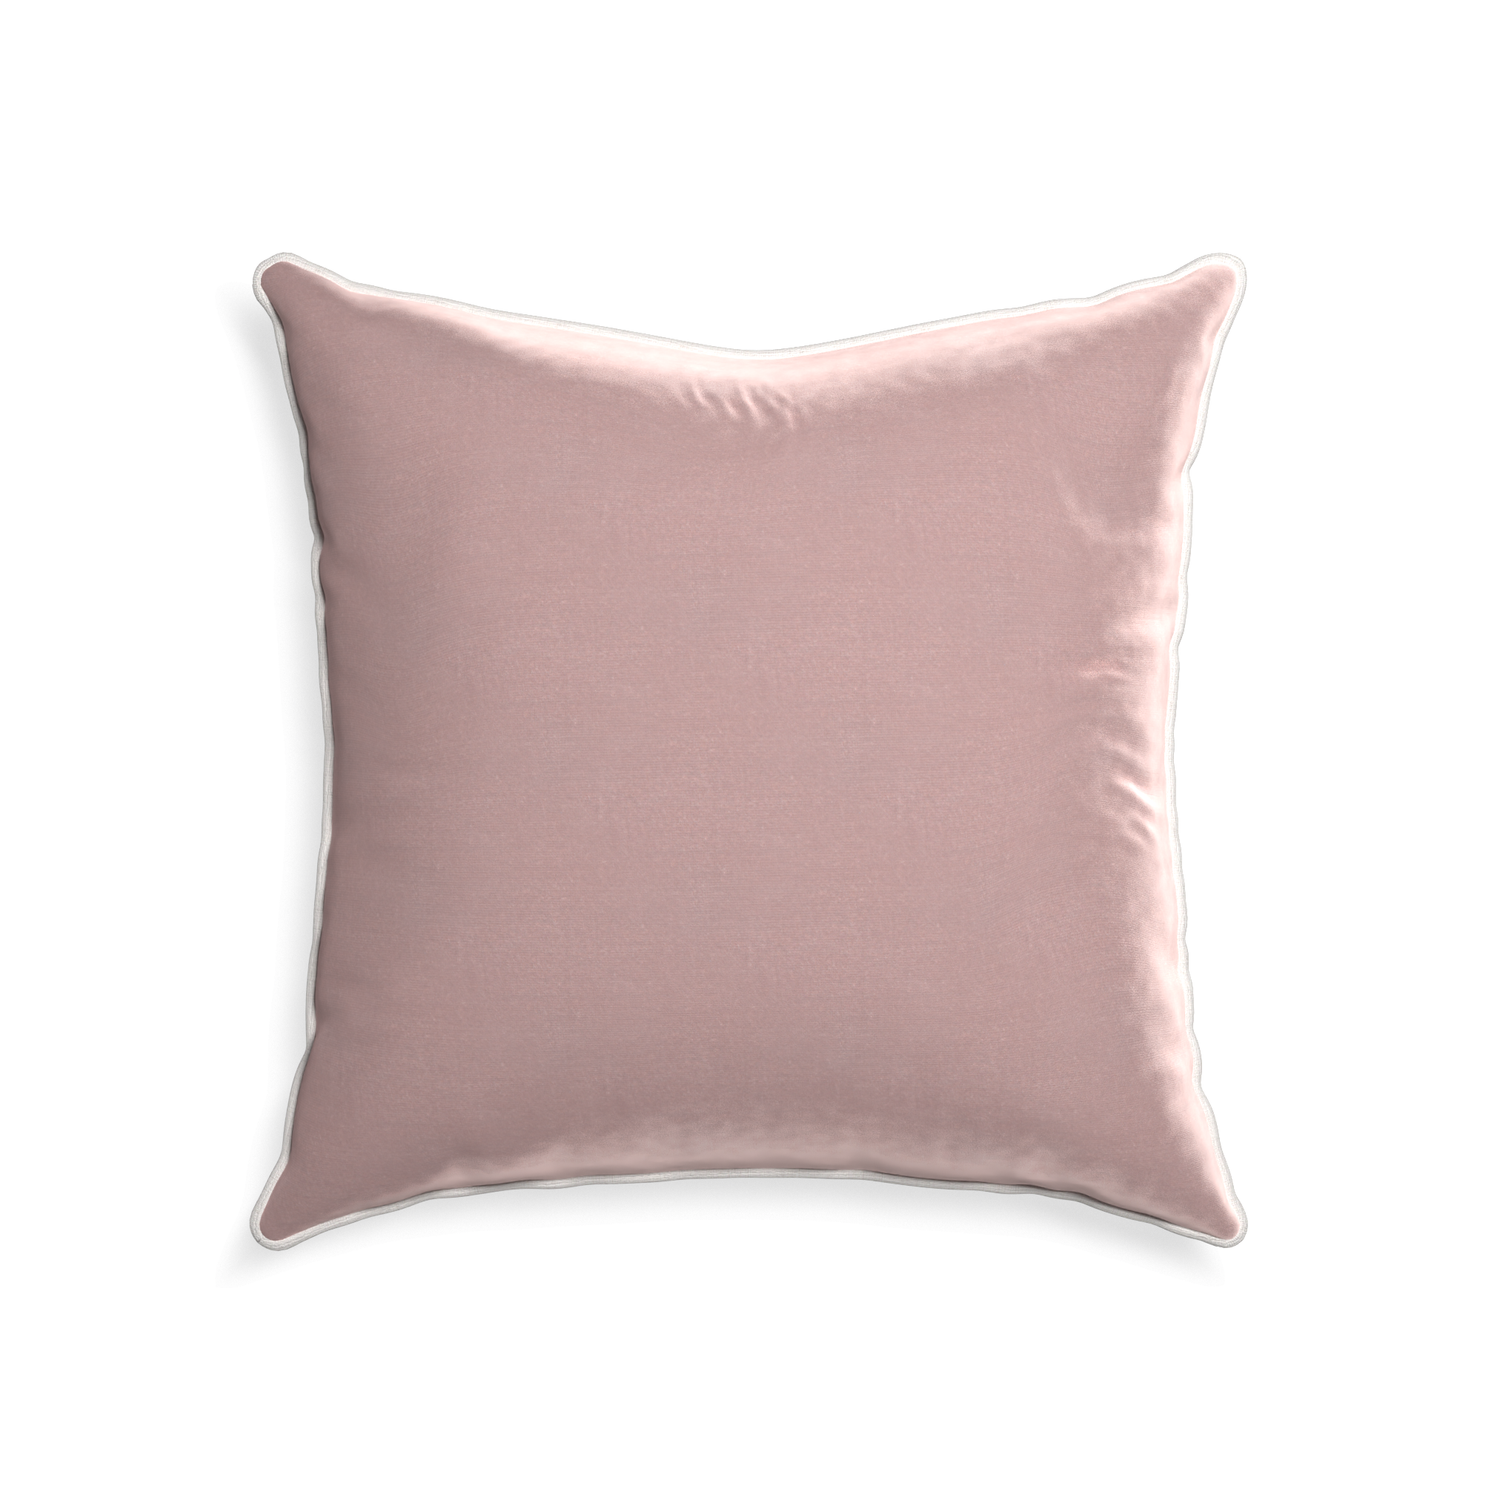 22-square mauve velvet custom pillow with snow piping on white background